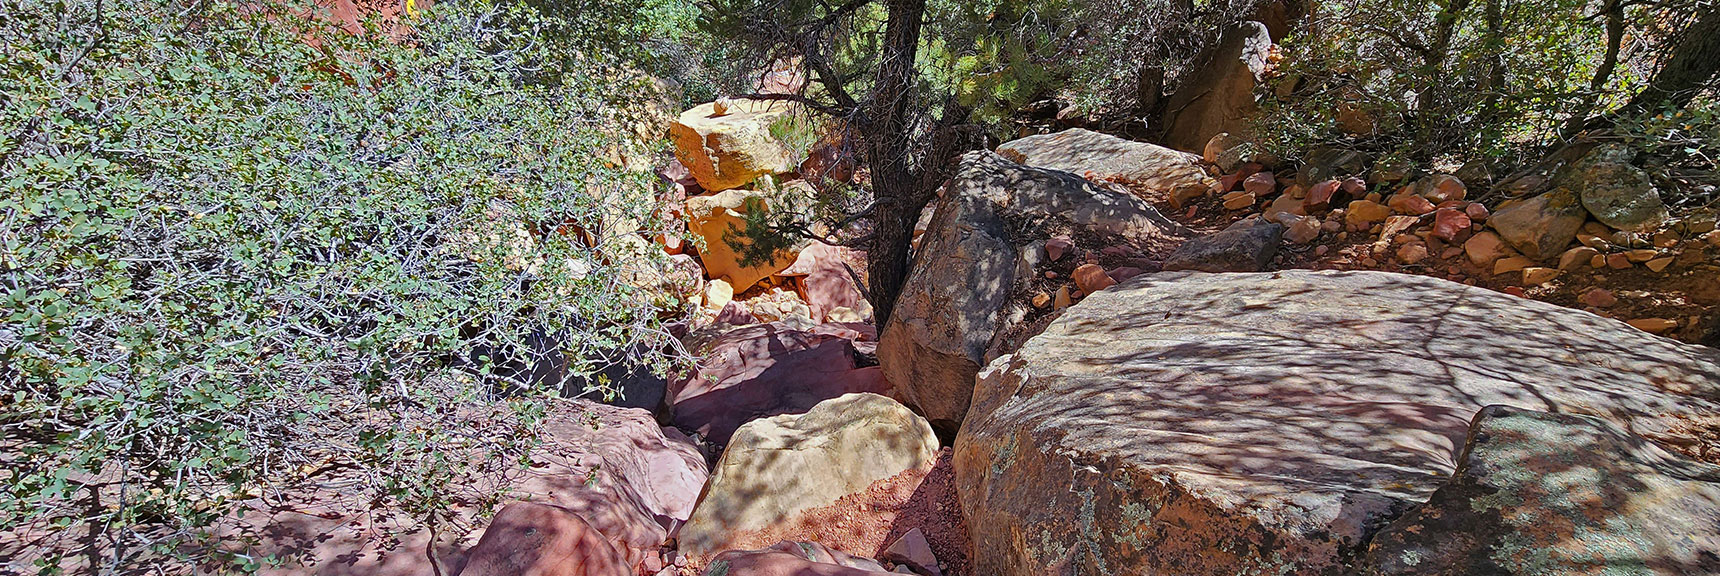 Cairns Continue All the Way. The Navigation Challenge Can Be Fun. | Juniper Canyon | Red Rock Canyon National Conservation Area, Nevada | David Smith | LasVegasAreaTrails.com